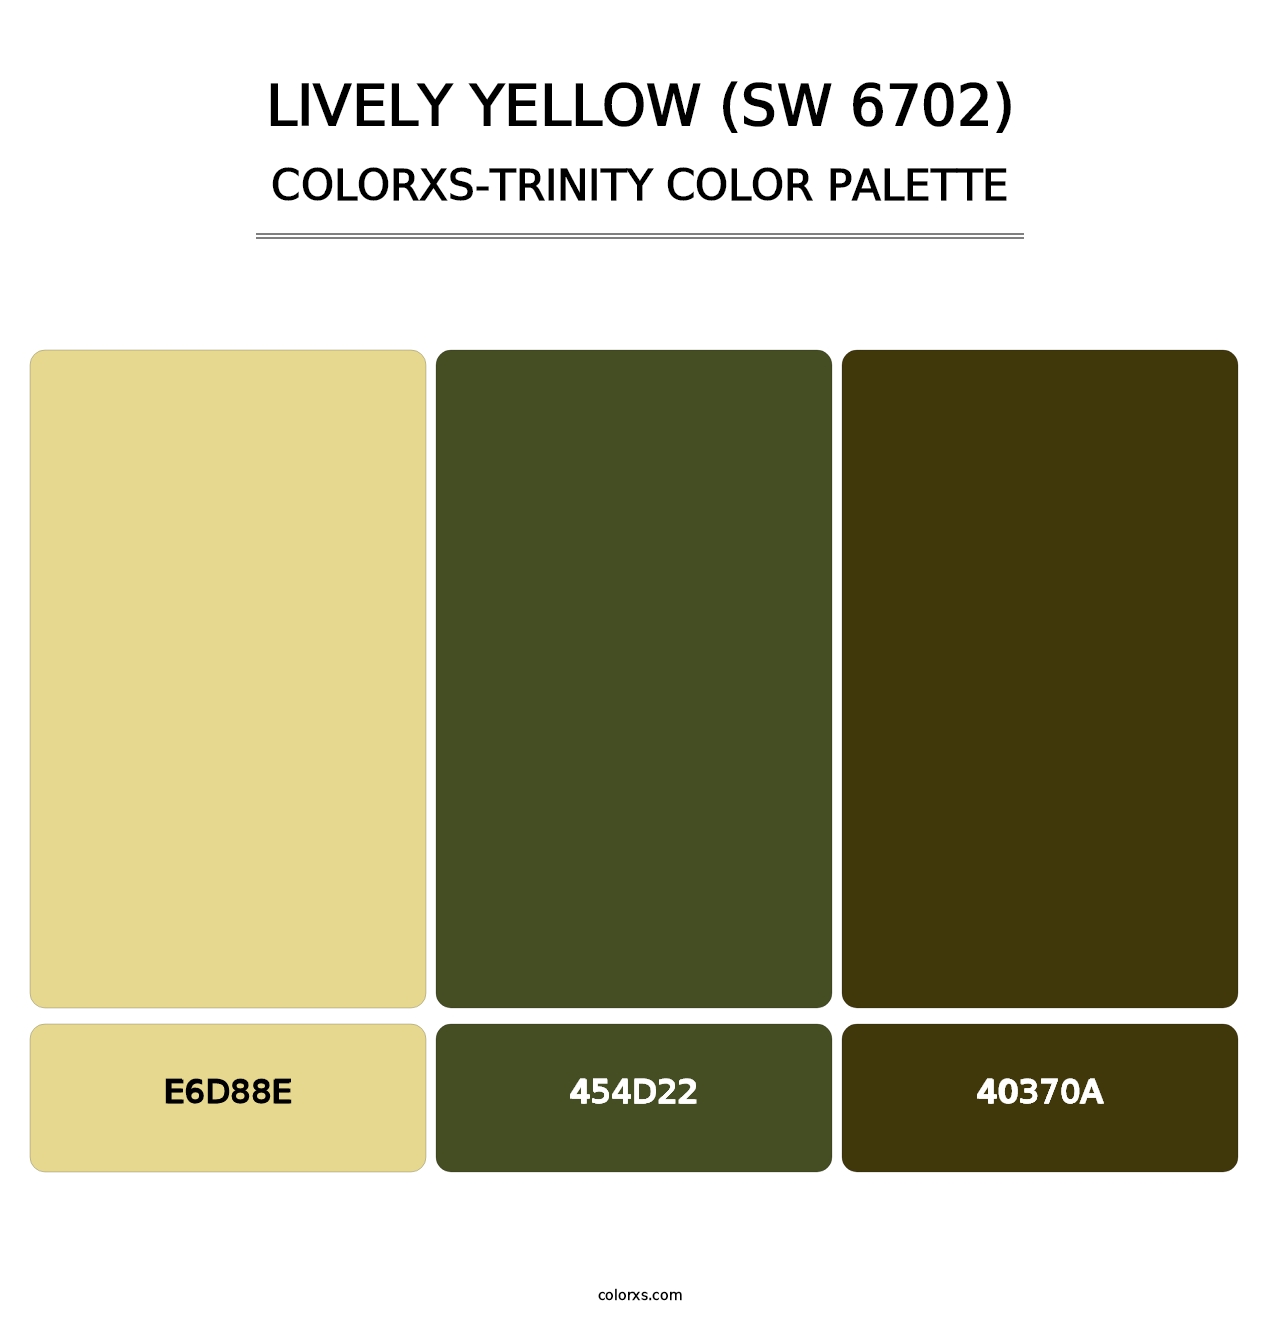 Lively Yellow (SW 6702) - Colorxs Trinity Palette